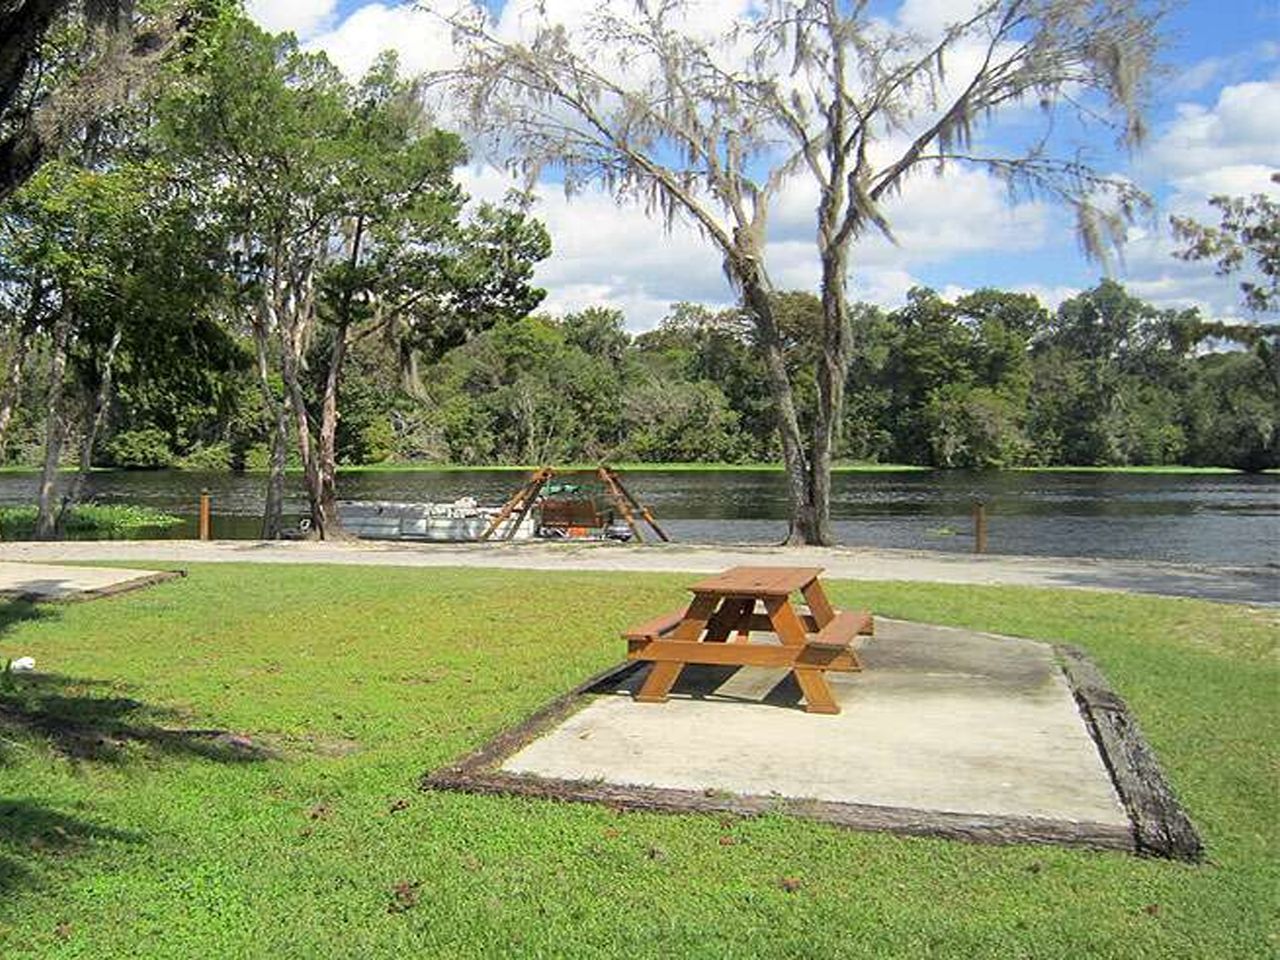 a picnic table is sitting in the grass next to a lake .